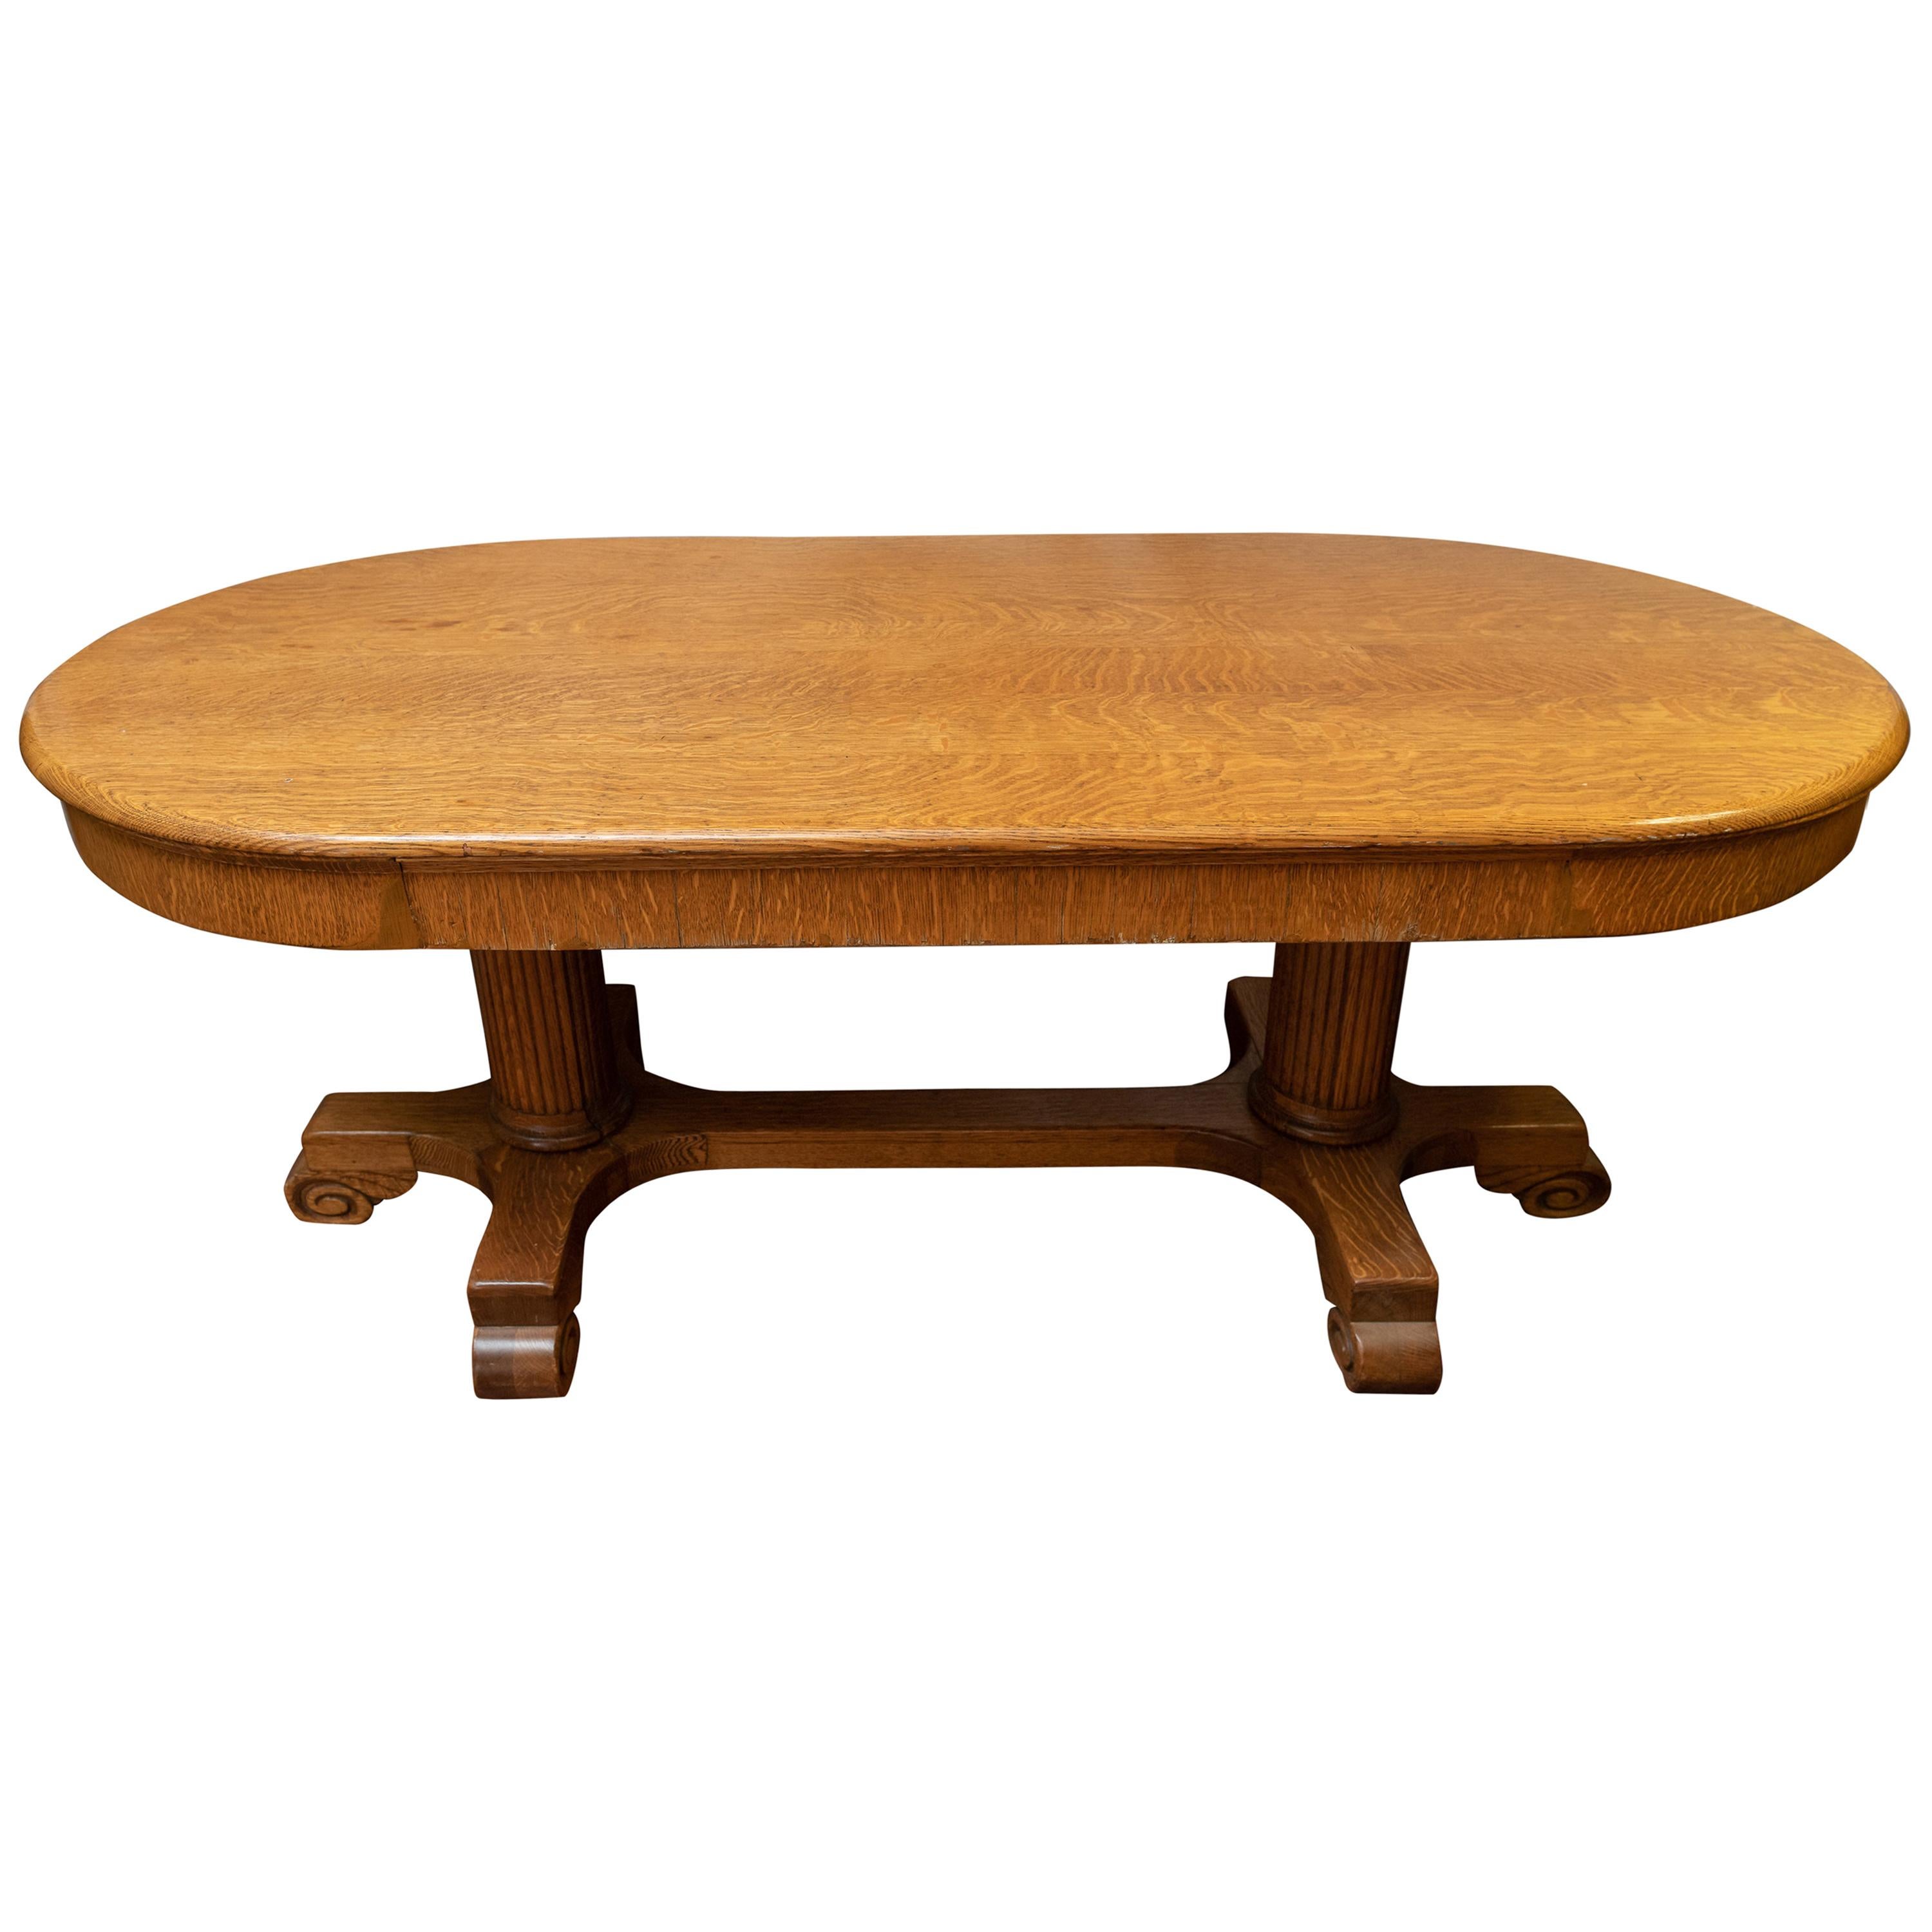 Large Oval Quarter Sawn Oak Conference Table/ Dining Room Table, circa 1900